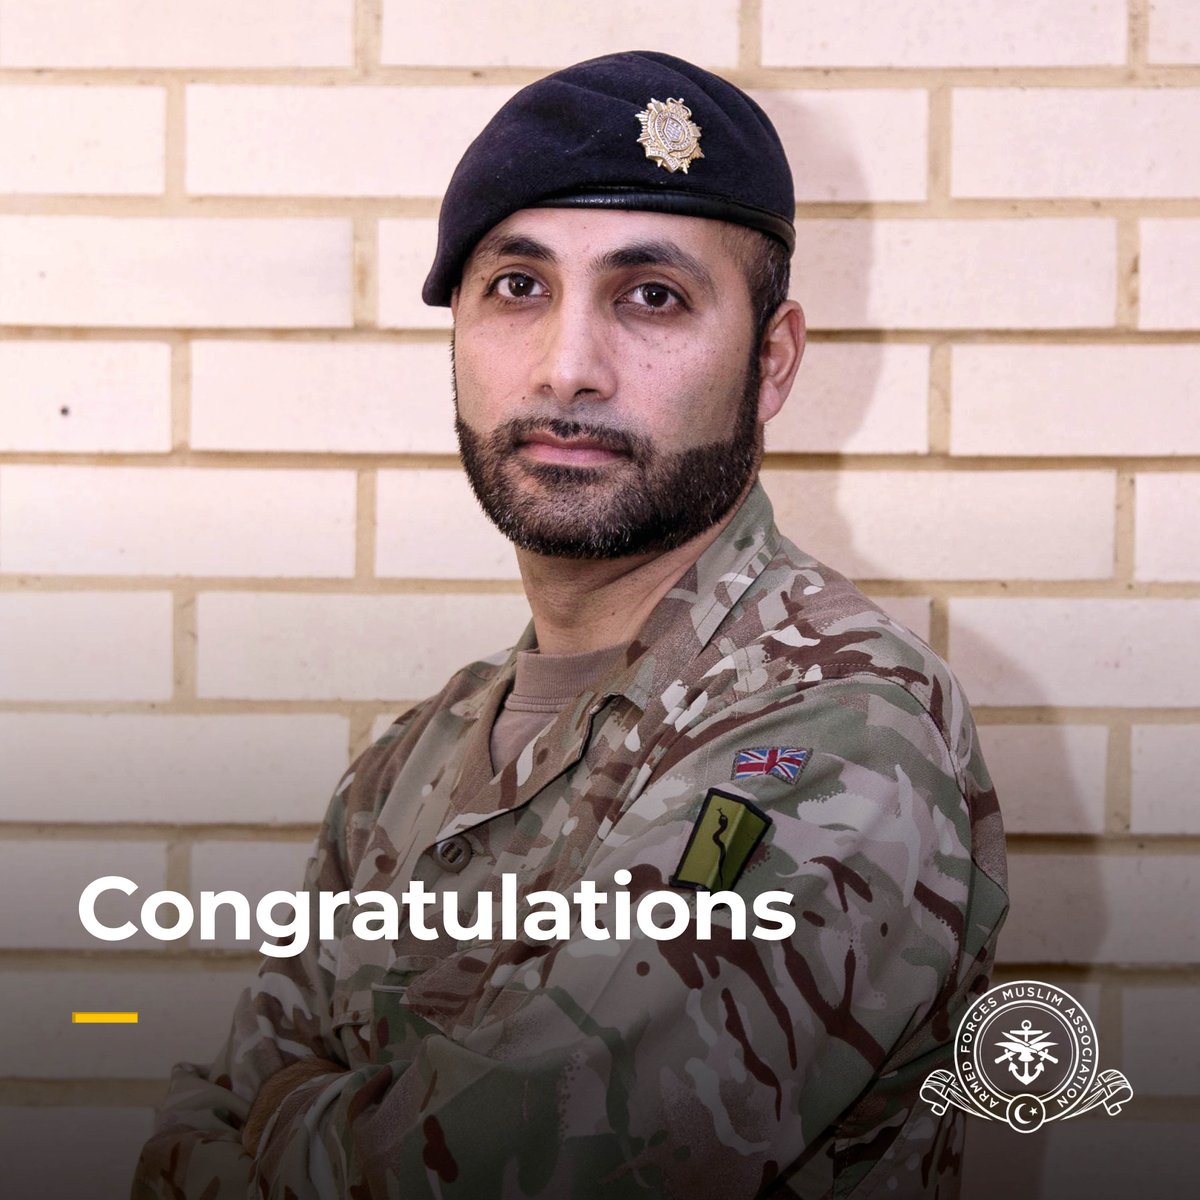 Congratulations to AFMA Member Zeshan Khan who has recently been promoted from Warrant Officer Class 2 to Warrant Officer Class 1. 

Find your future in the Armed Forces with AFMA.org.uk.

#WeAreAFMA #BritishArmedForces #Promotion #WarrantOfficer #ArmyLife